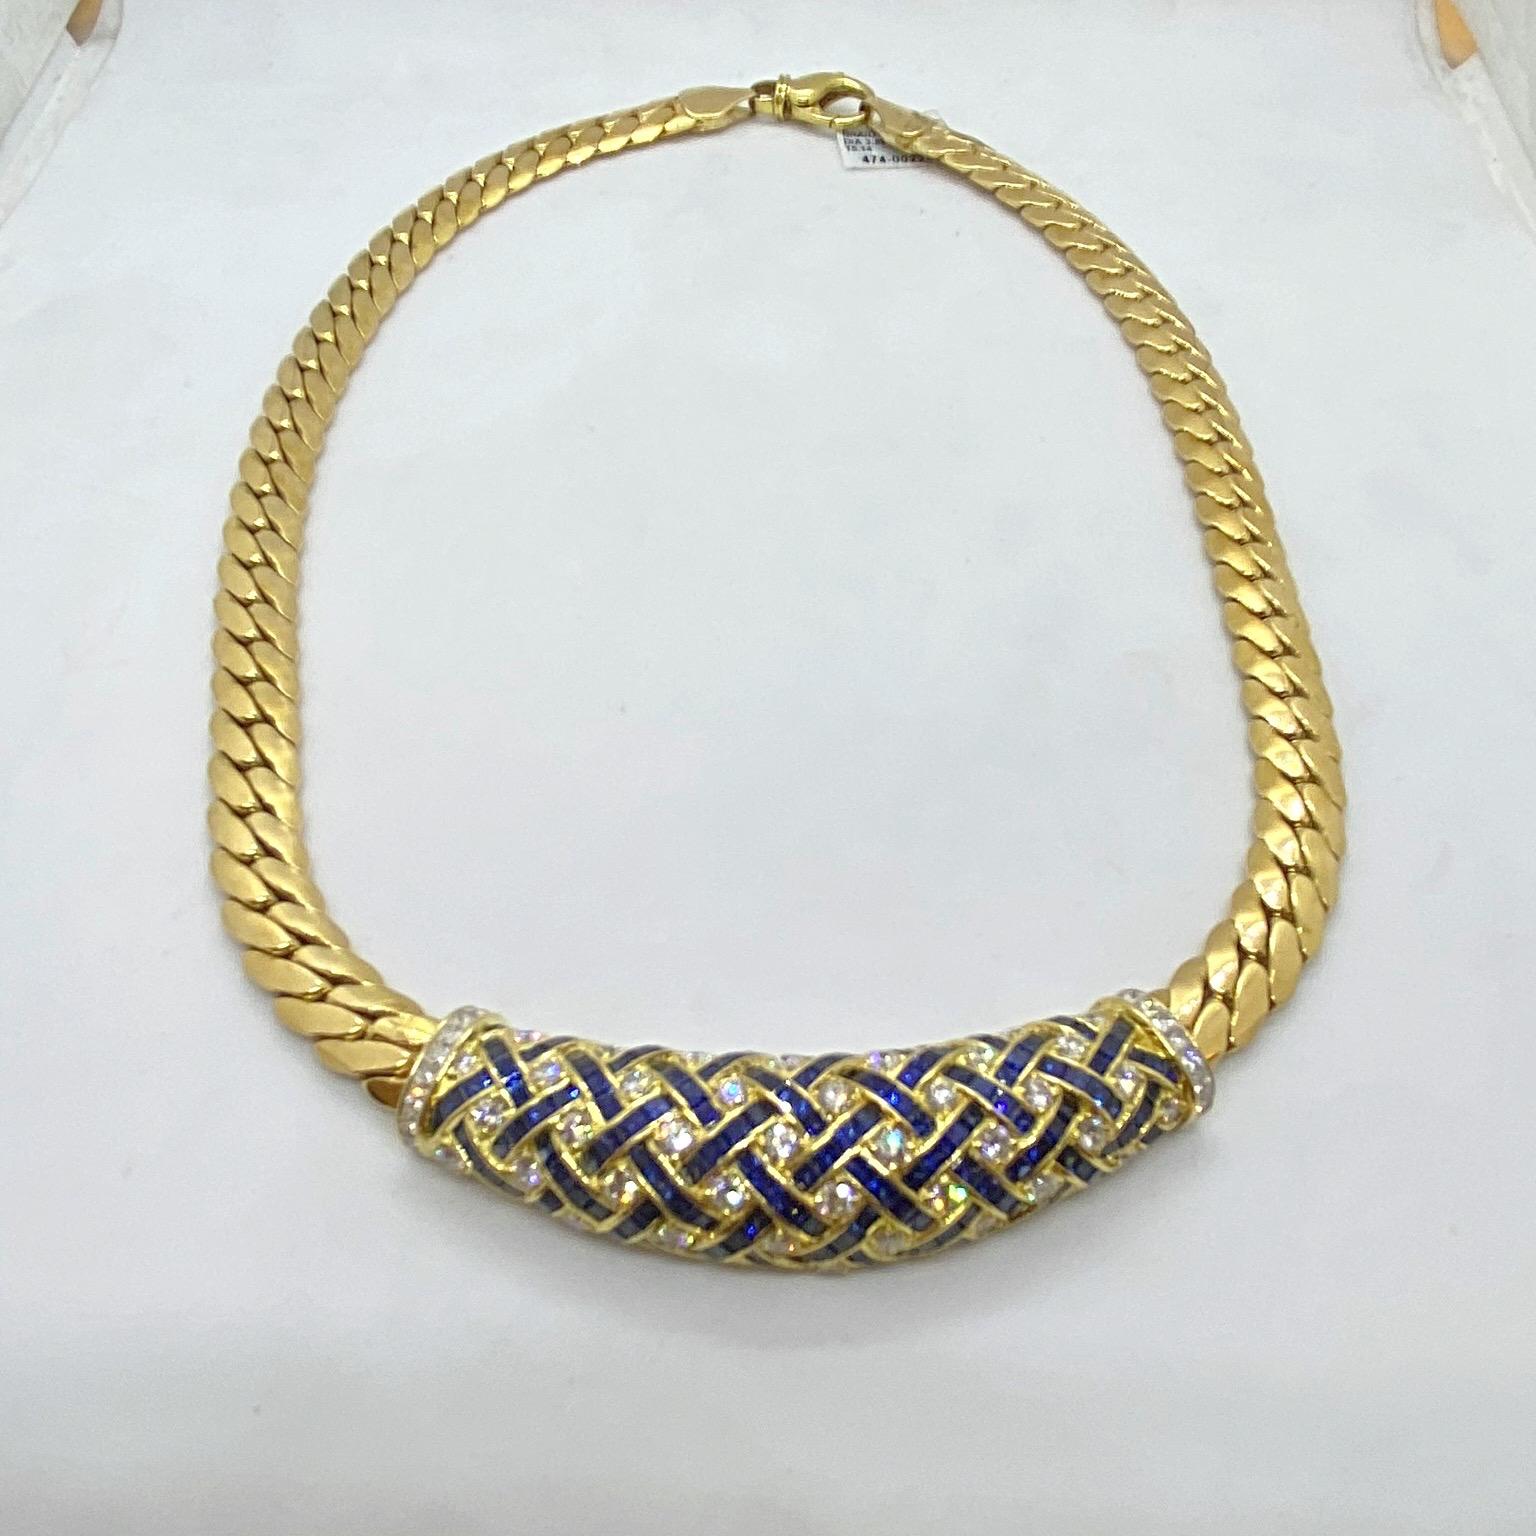 The highlight of this 18 karat yellow gold necklace is the beautiful center section. Round Brilliant Diamonds and Square Cut Blue Sapphires are set in a basket weaved pattern amid a 2 5/8